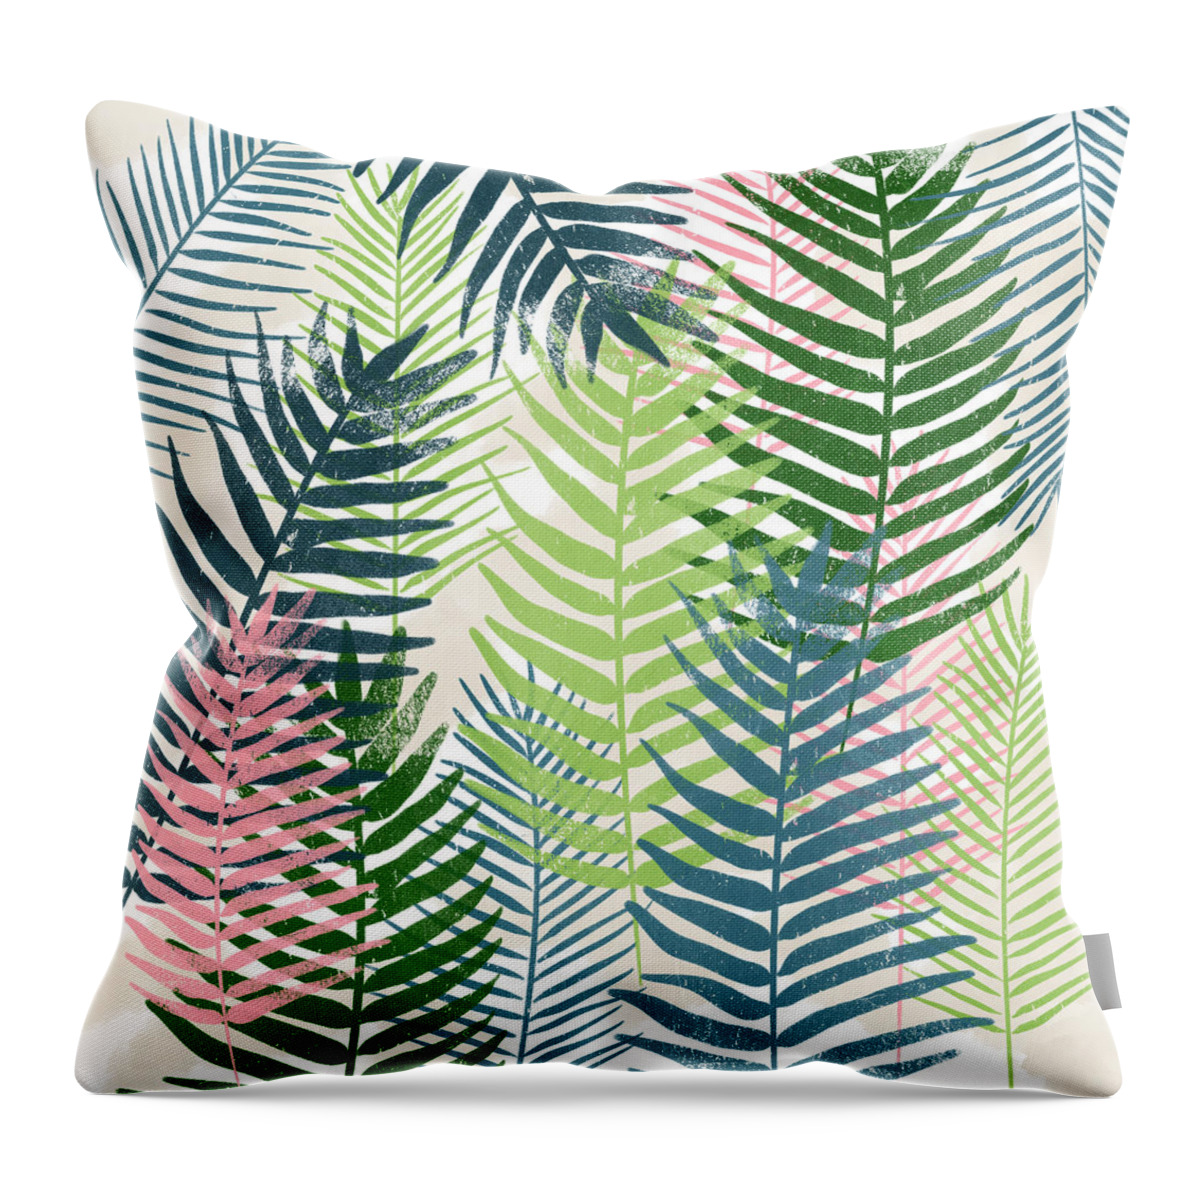 Tropical Throw Pillow featuring the mixed media Colorful Palm Leaves 2- Art by Linda Woods by Linda Woods